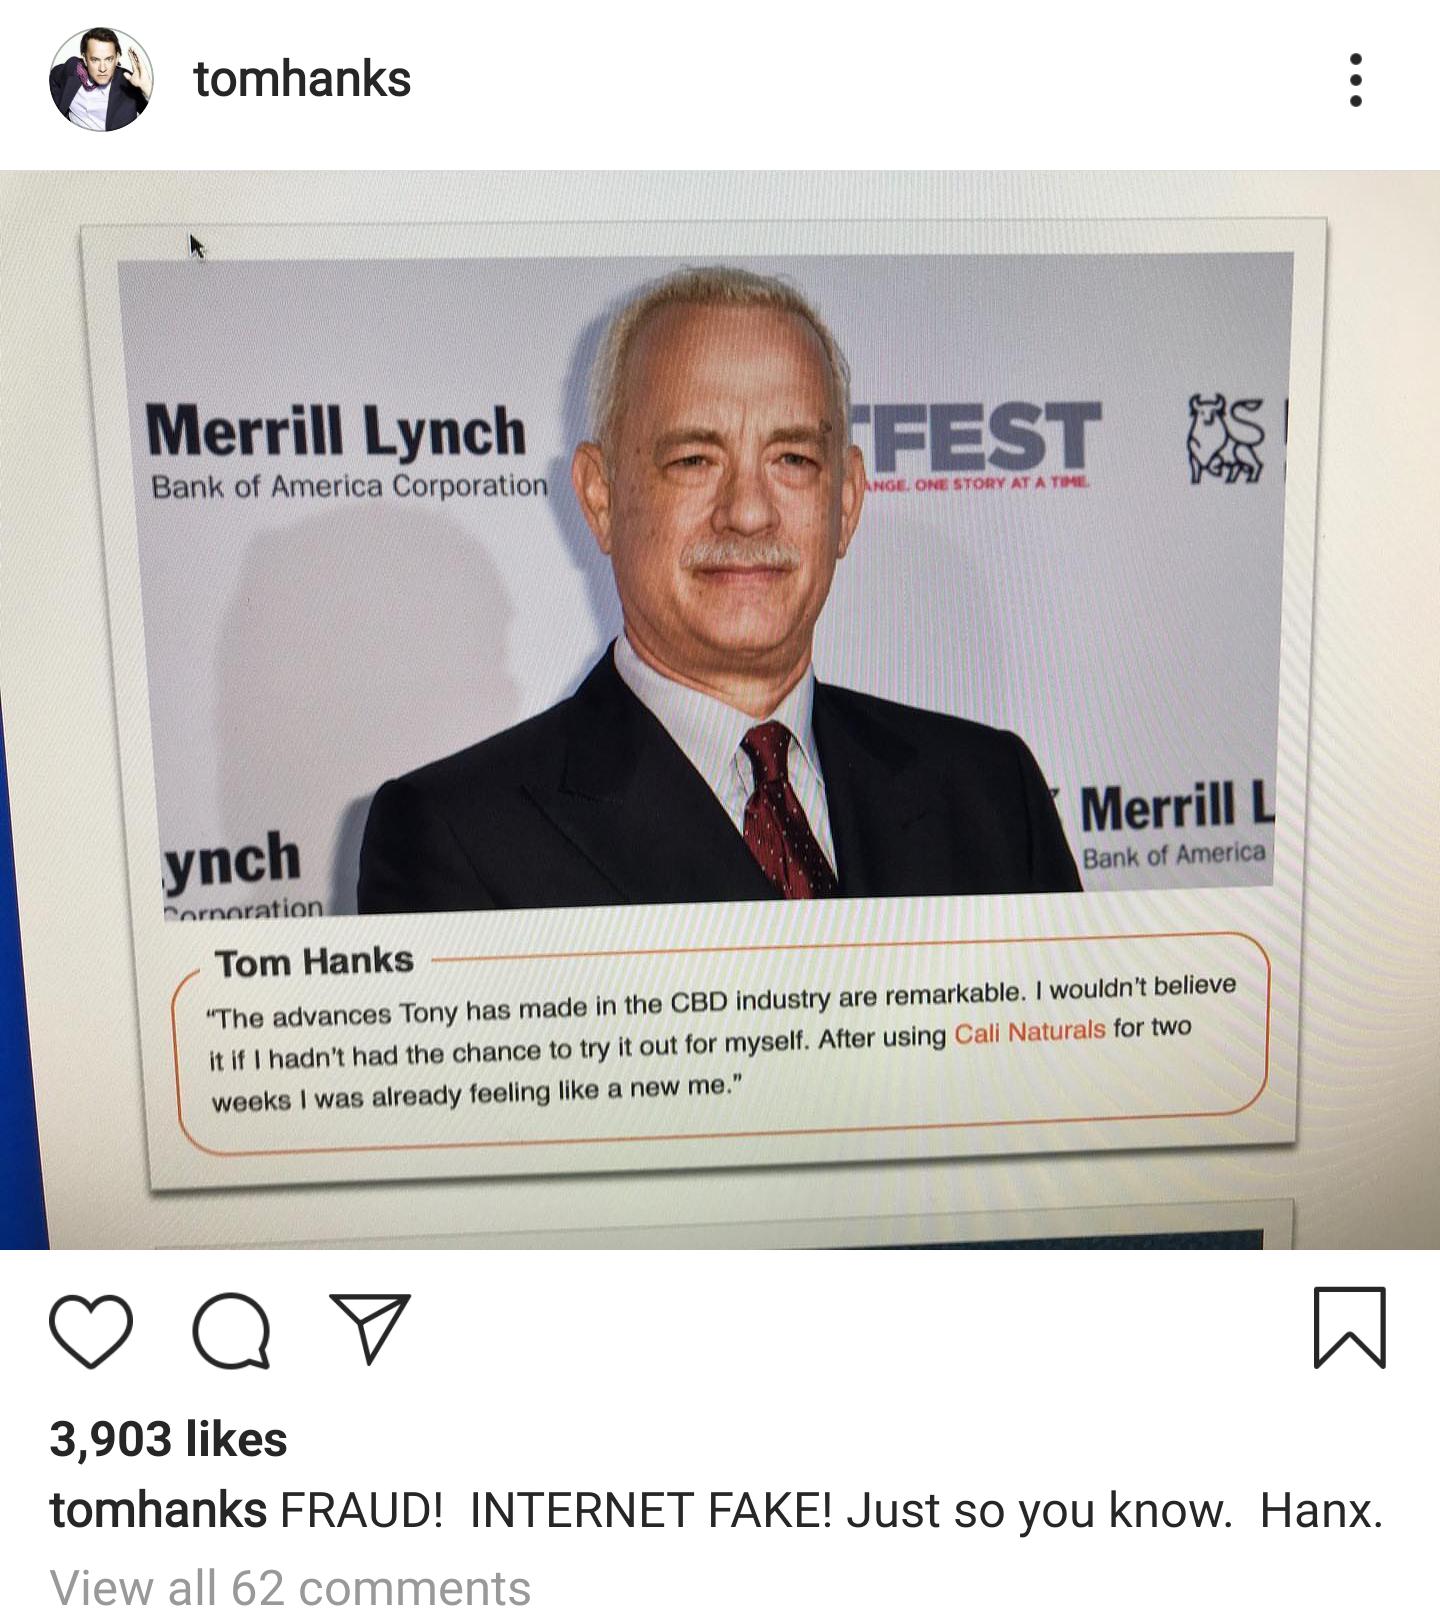 tomhanks Merrill Lynch Bank of America Corporation Fest To Ange. One Story At A Time ynch Merrill L Bank of America Carnoration Tom Hanks